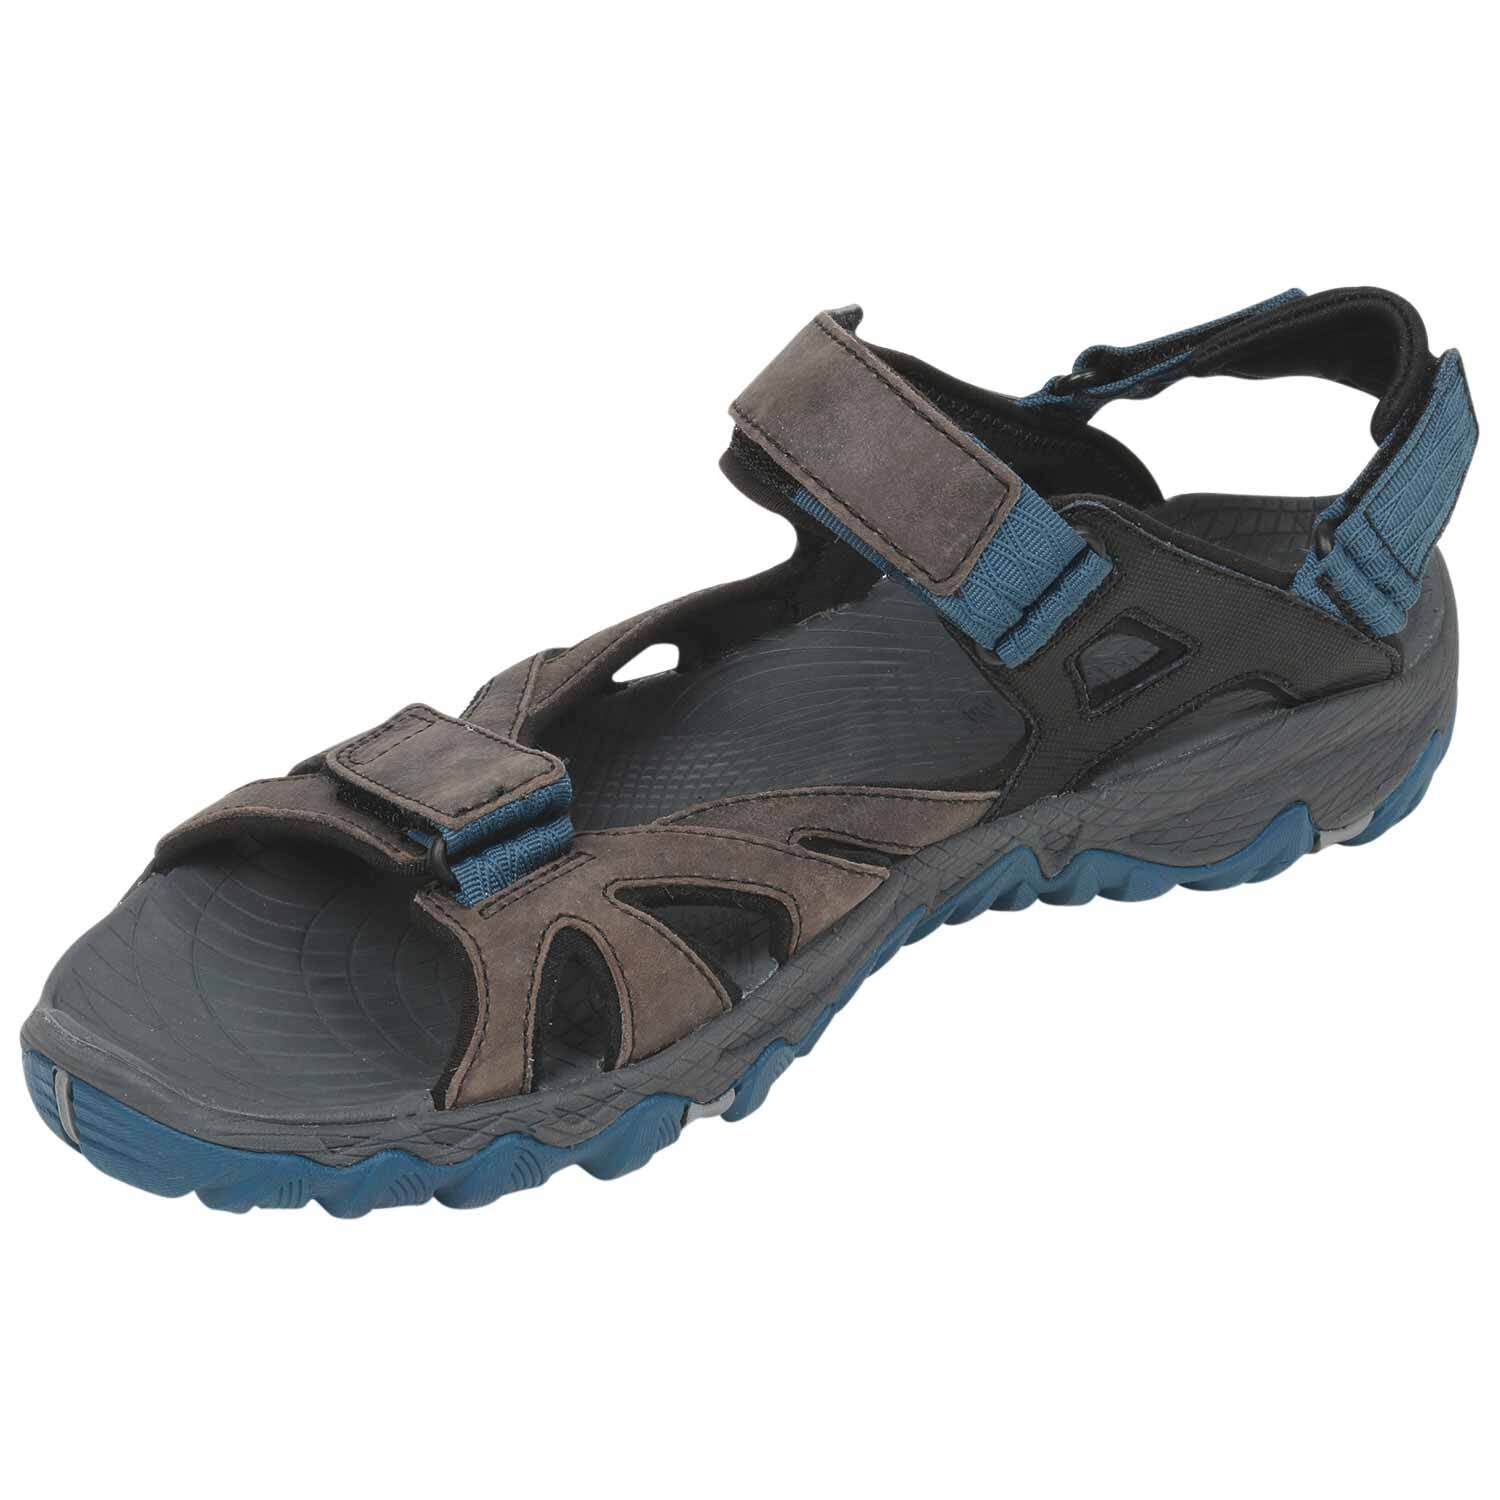 Merrell Boys Hydro Blaze Shoes Sandals Blue Green Sports Outdoors Breathable 